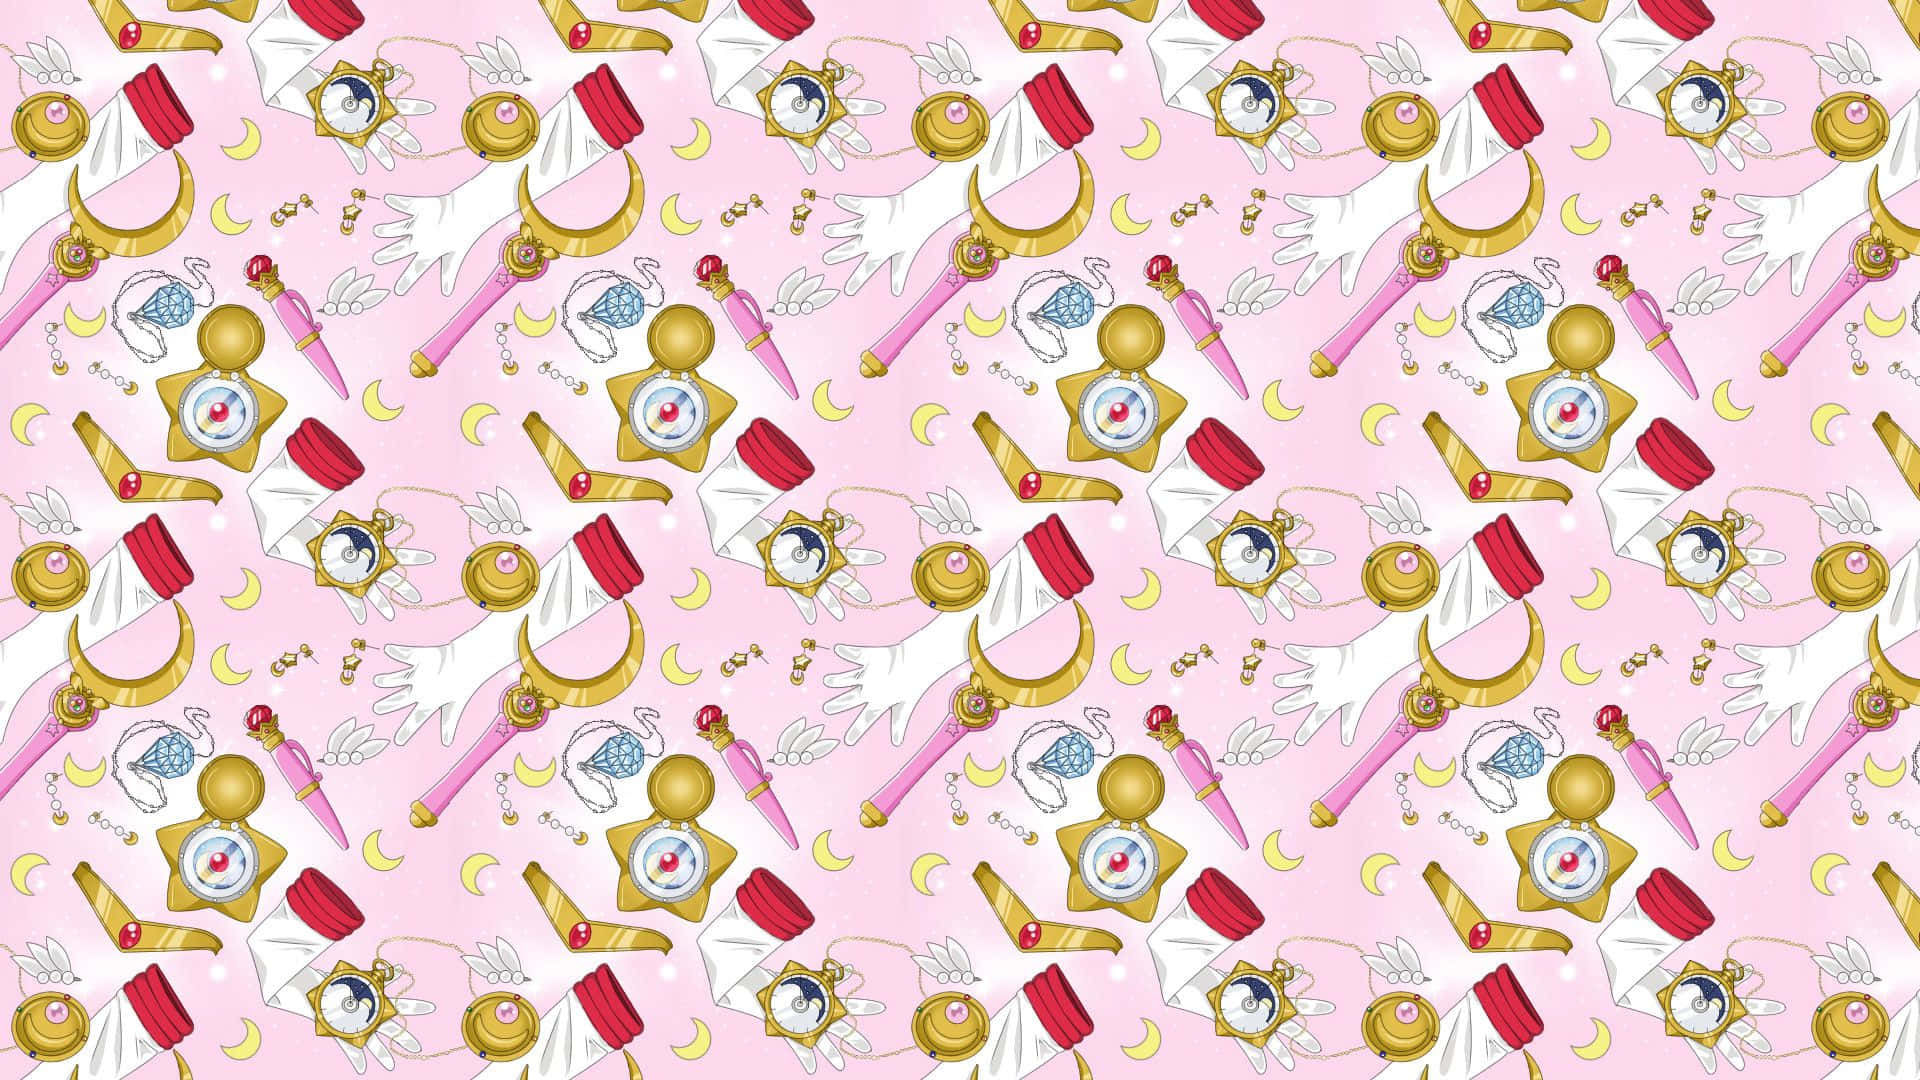 Unlock the power of the sailor scout within you! Wallpaper